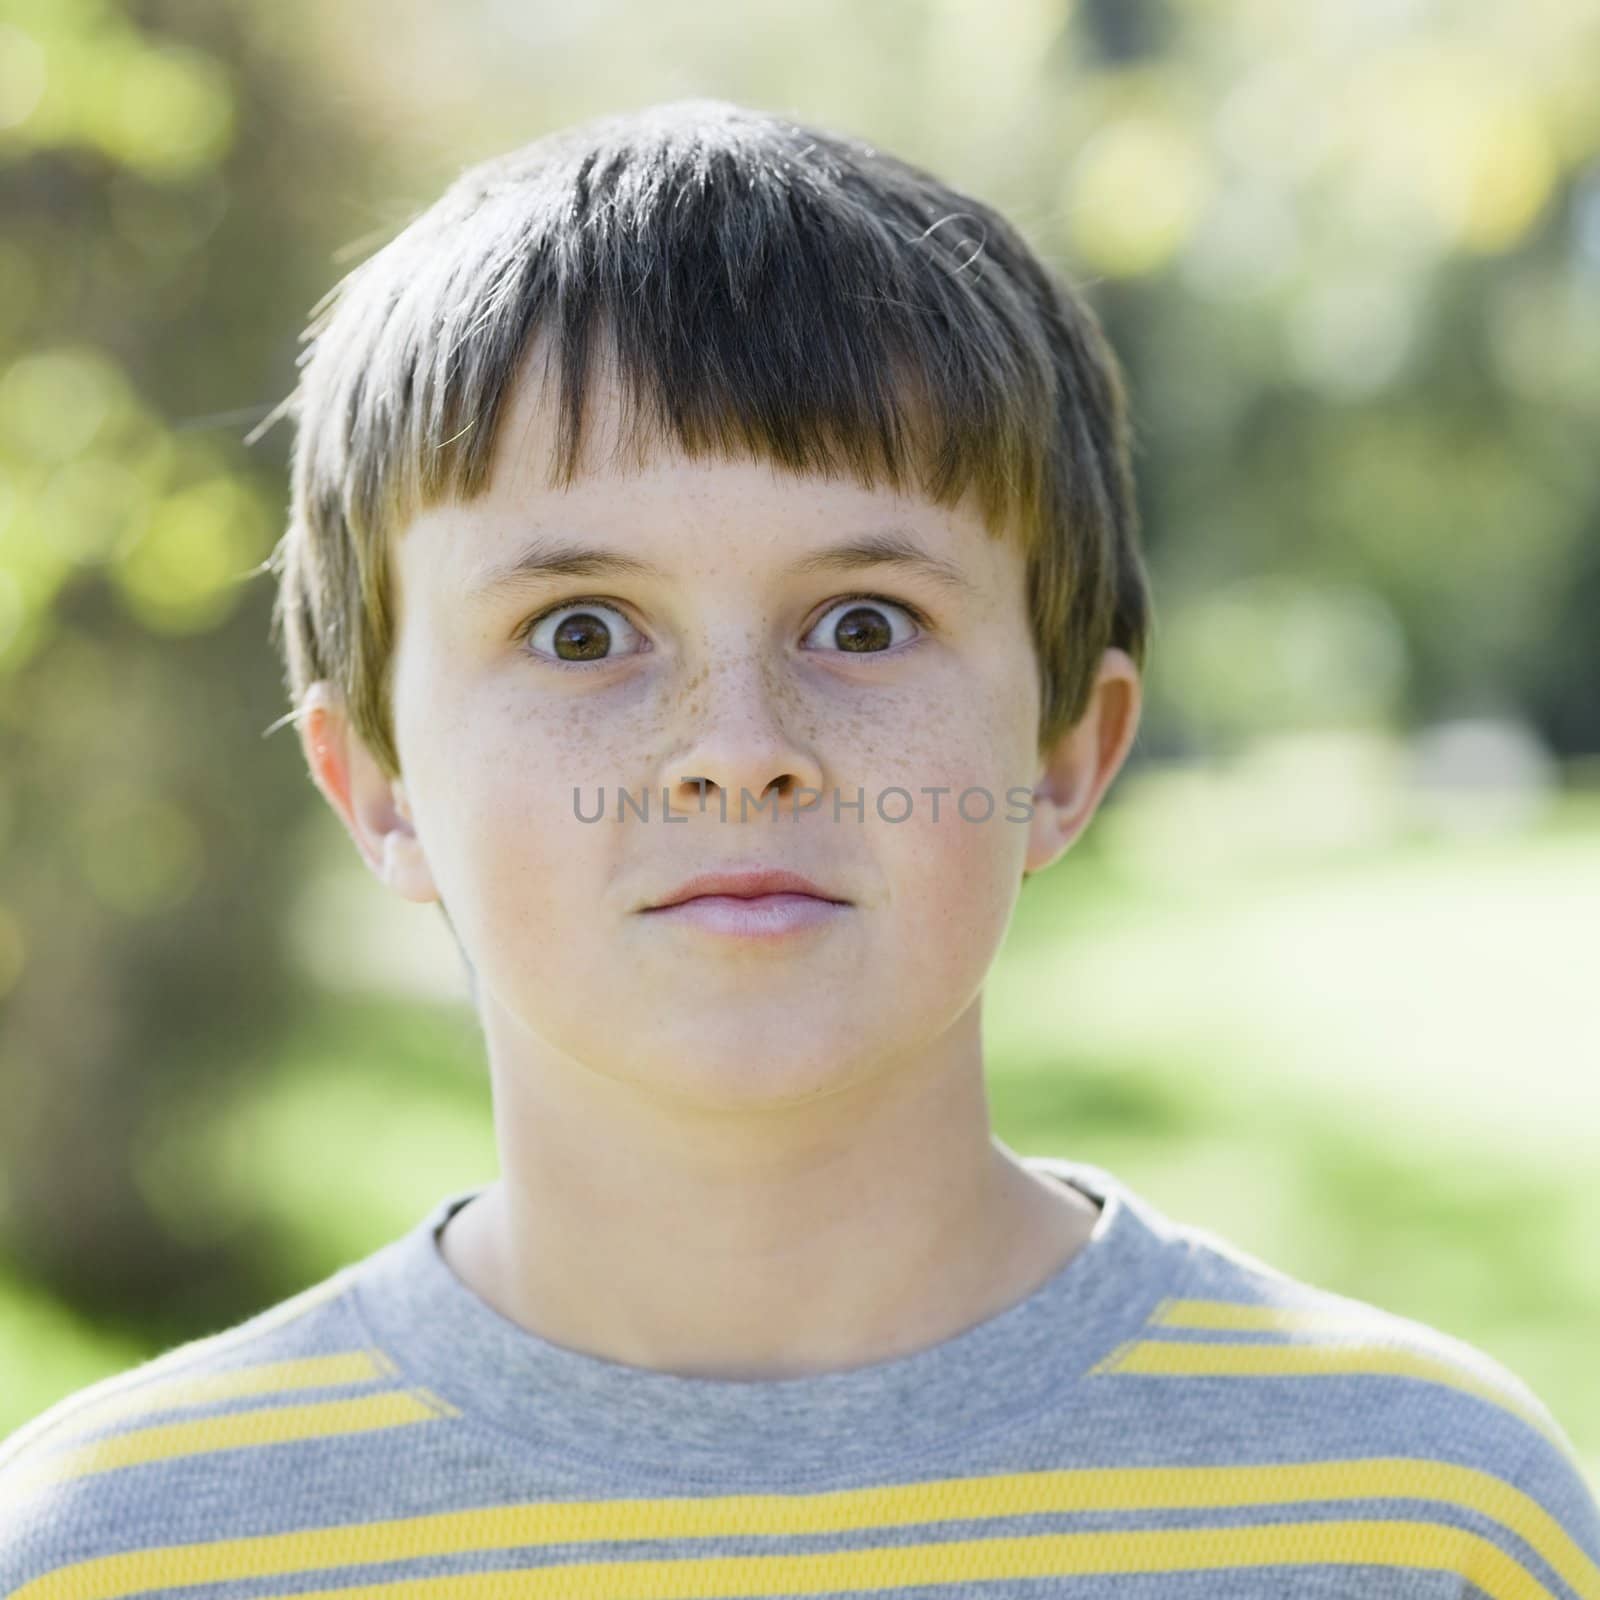 Portrait of a Cute Young Boy Outdoors making a Funny Look With His Eyes